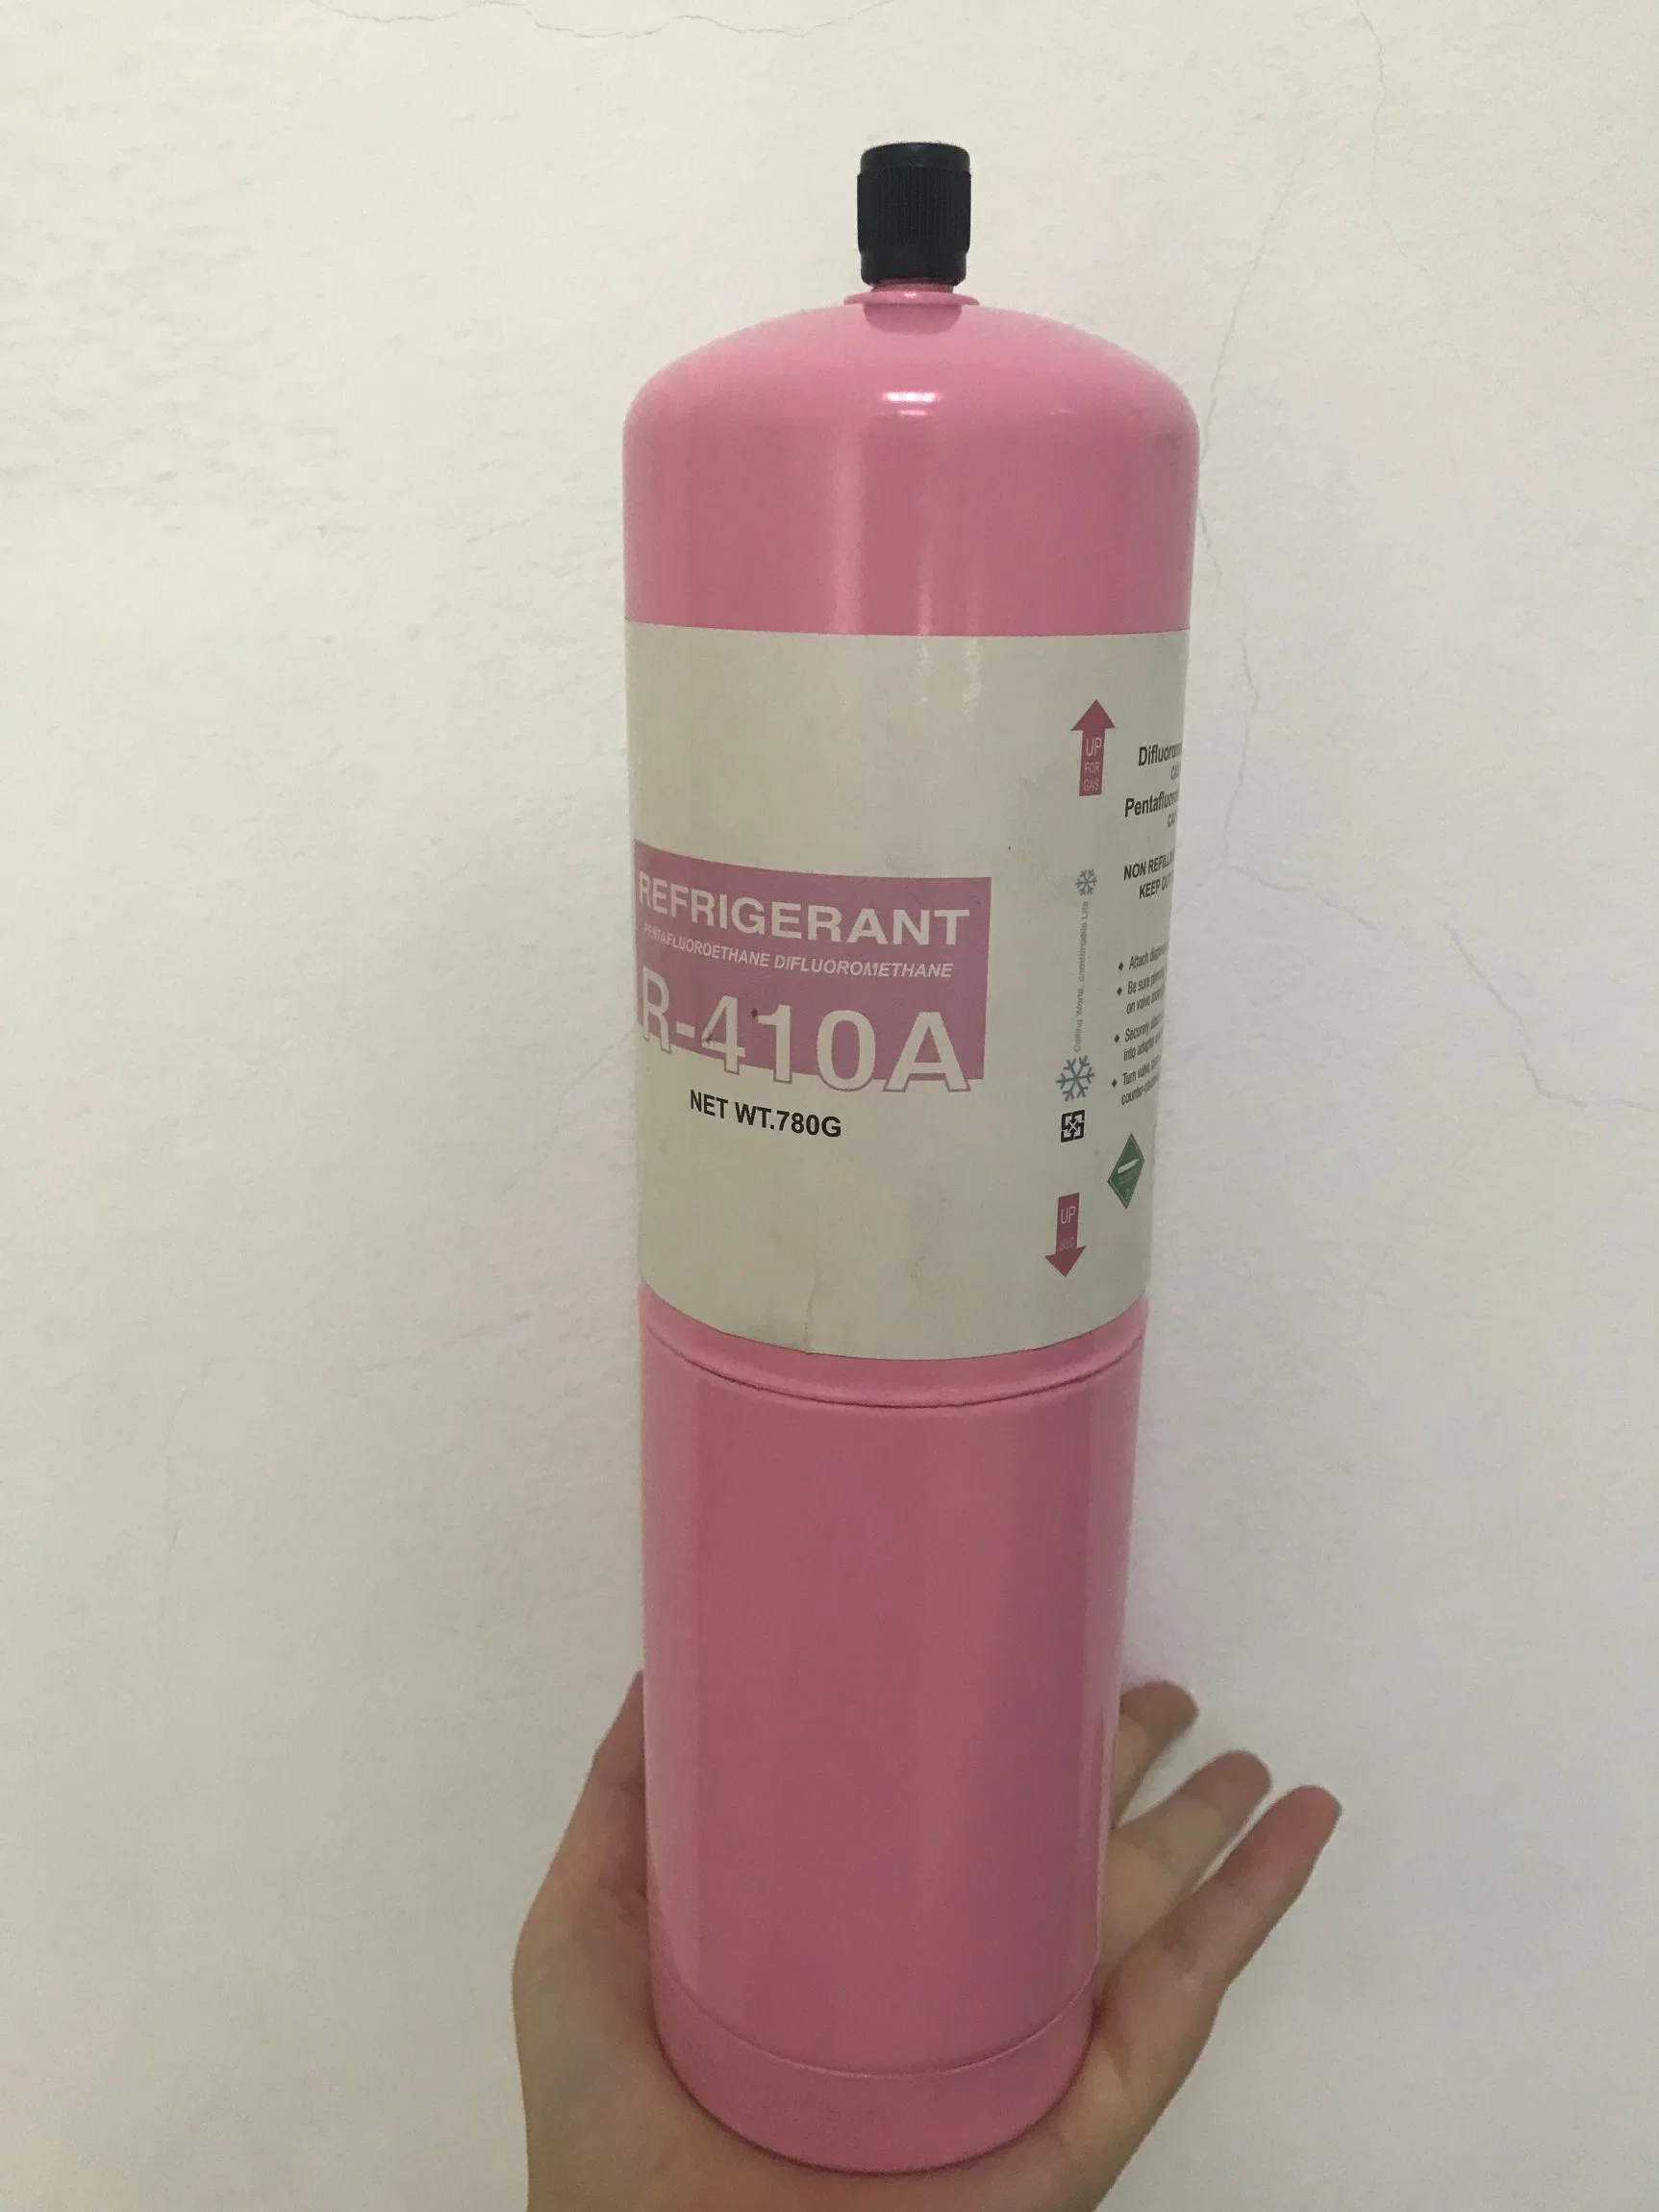 Non-Flammable R-410A Refrigerant Gas in a 11.3kg Cylinder